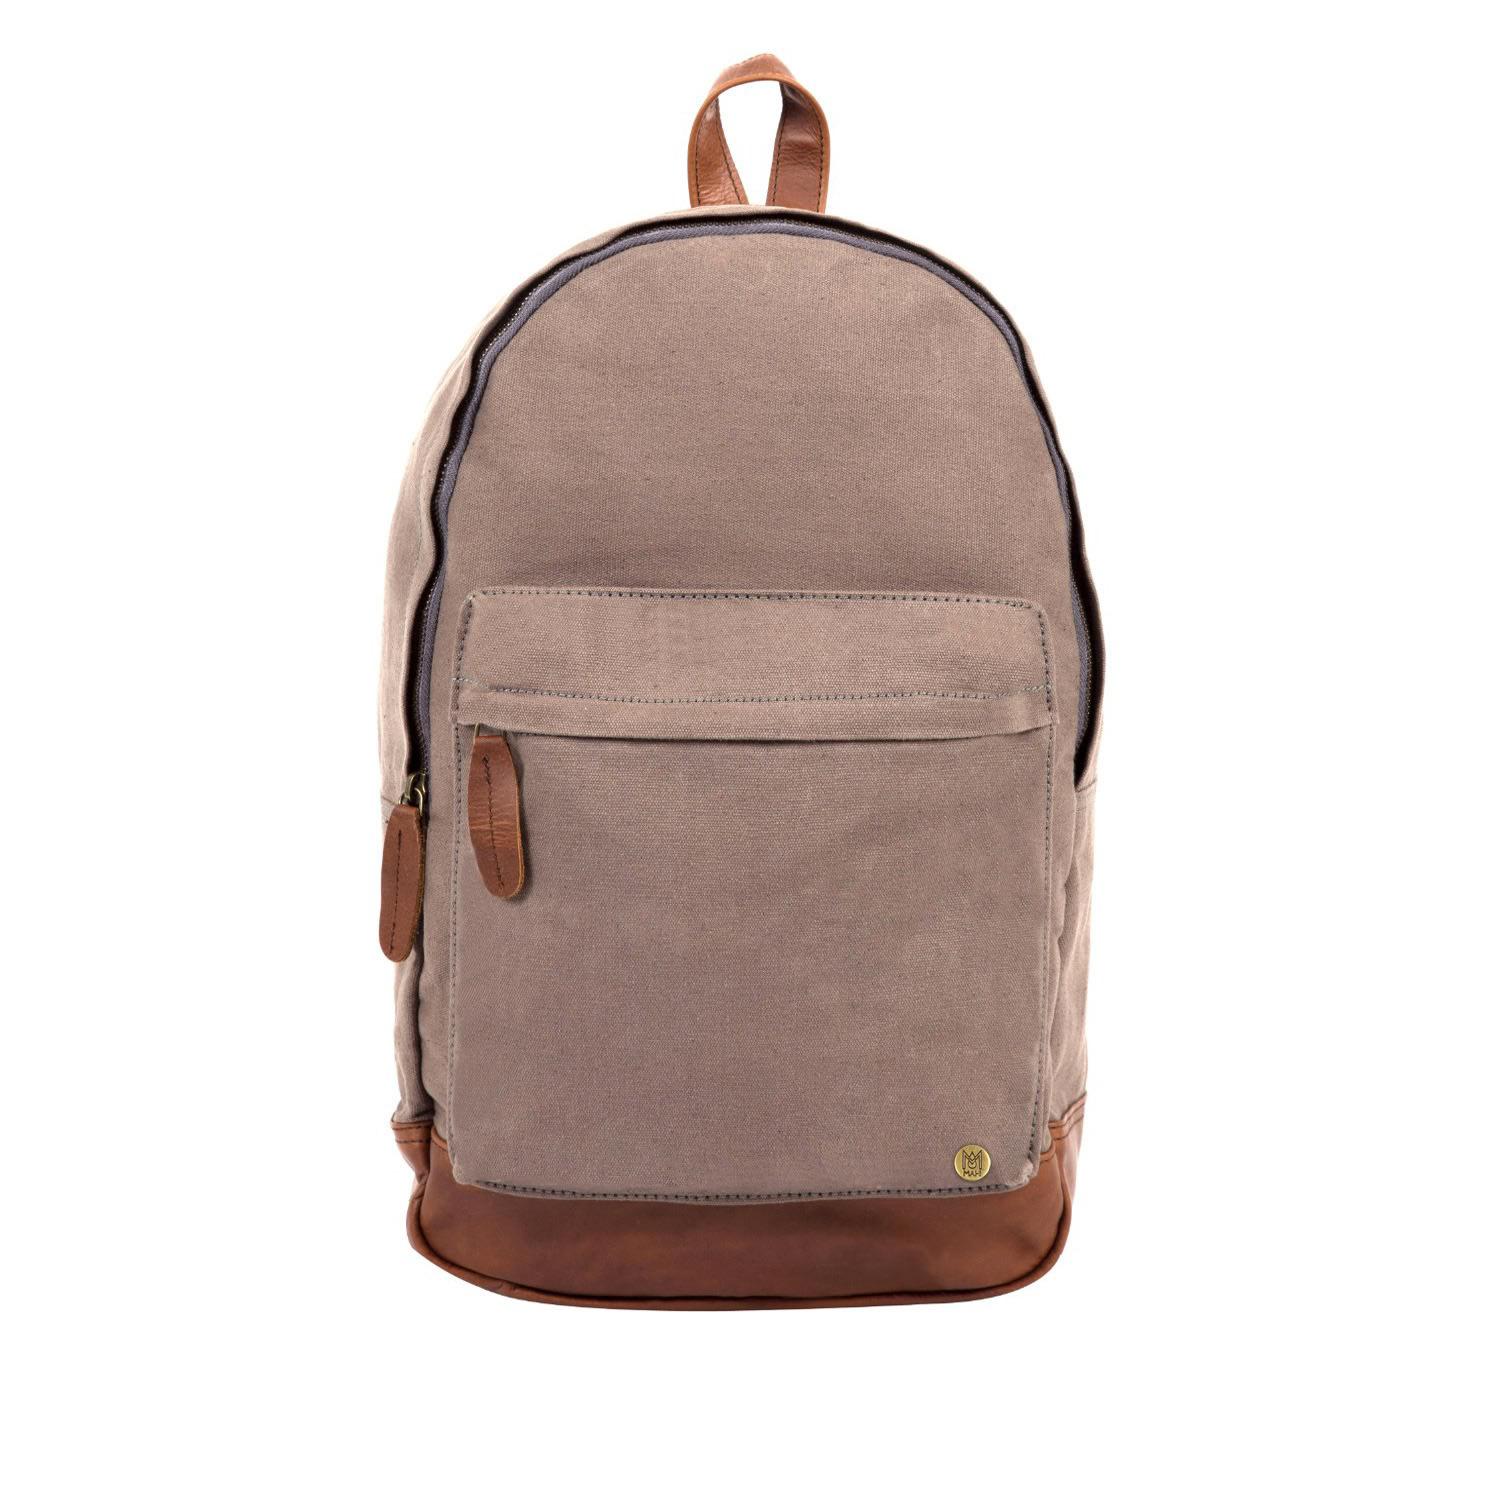 Lyst - Mahi Leather Leather Canvas Classic Backpack Rucksack In Grey in Gray for Men